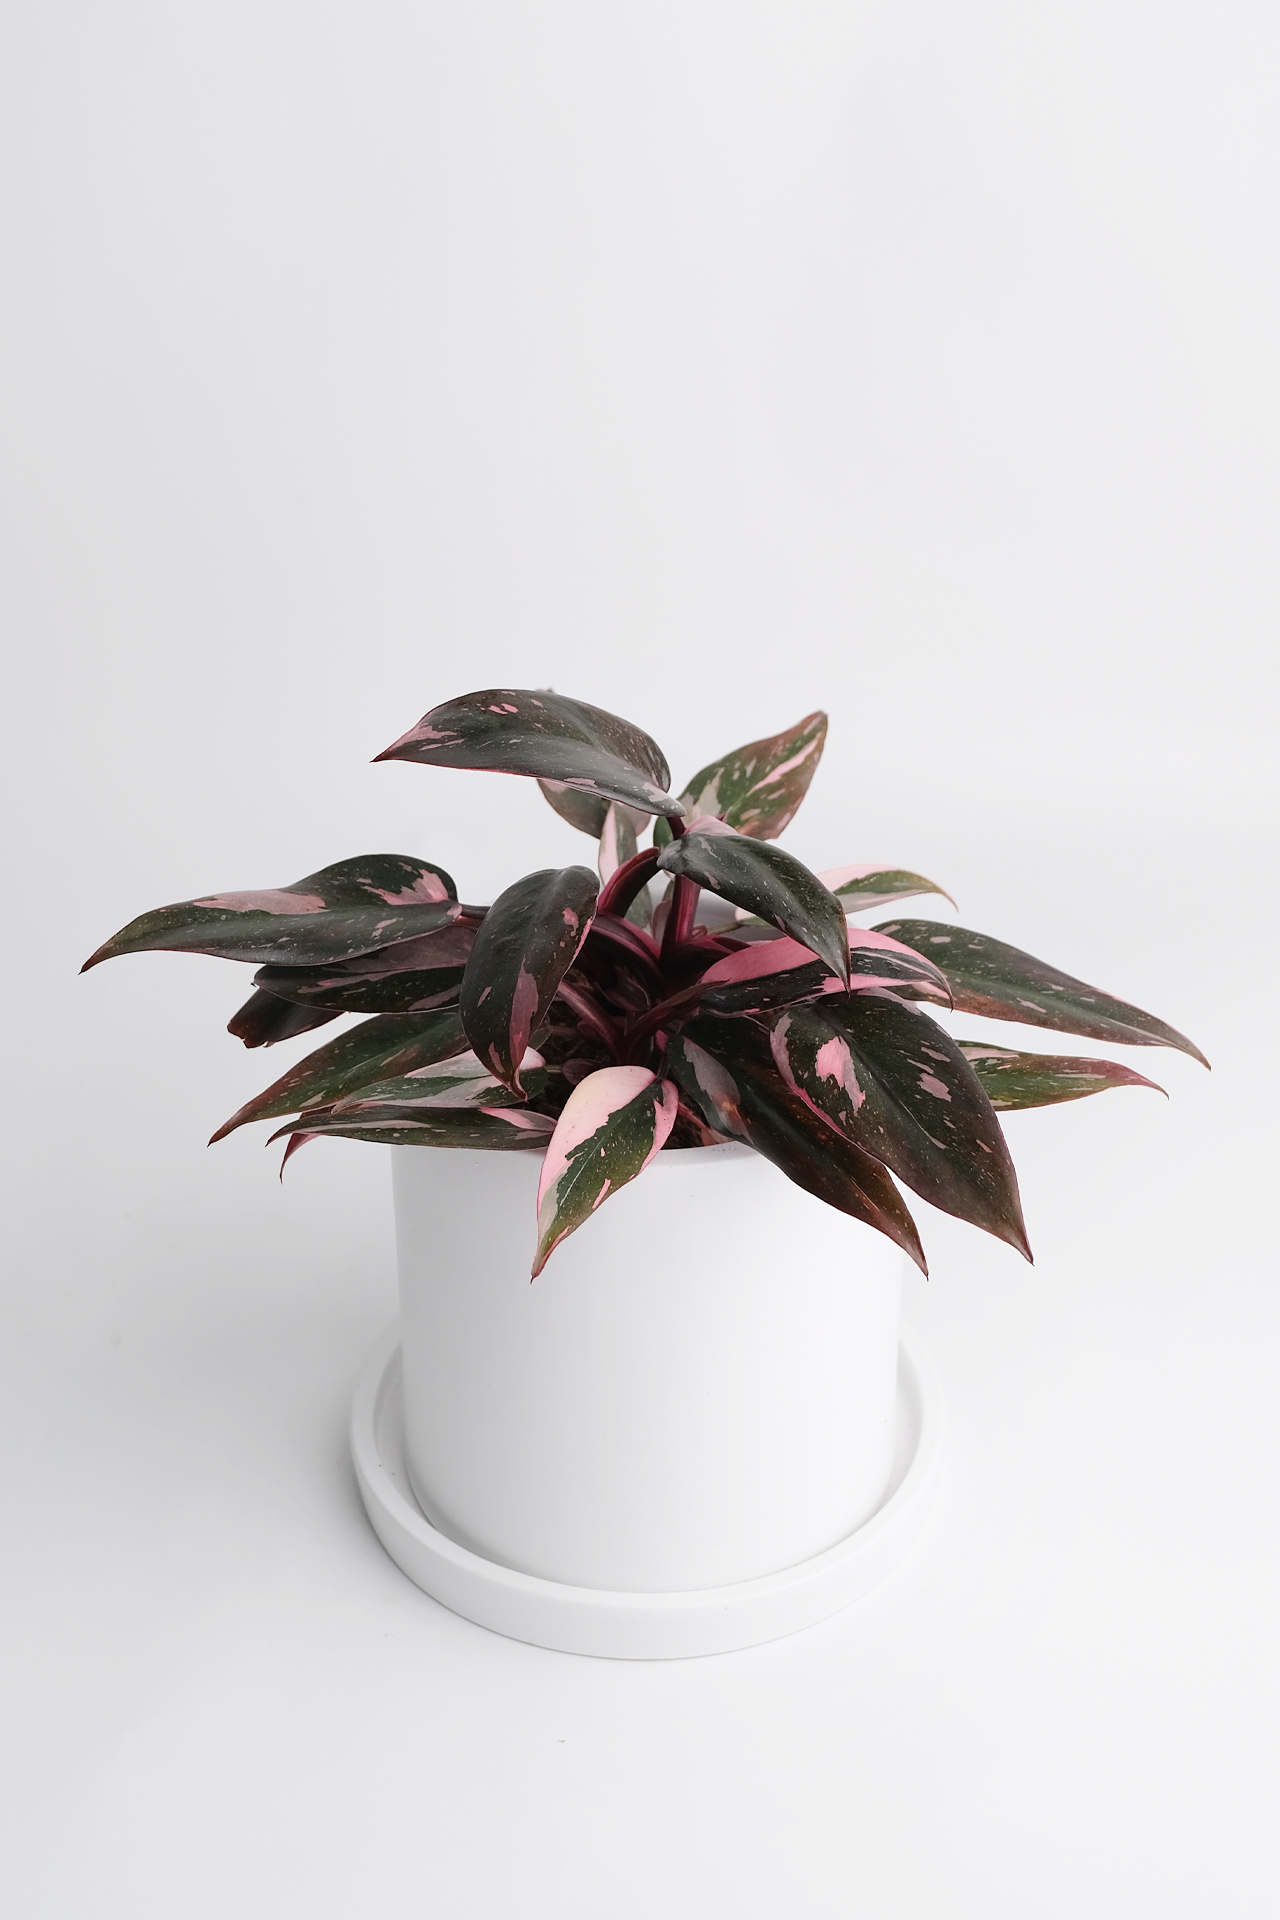 04_Philodendron Pink Princess